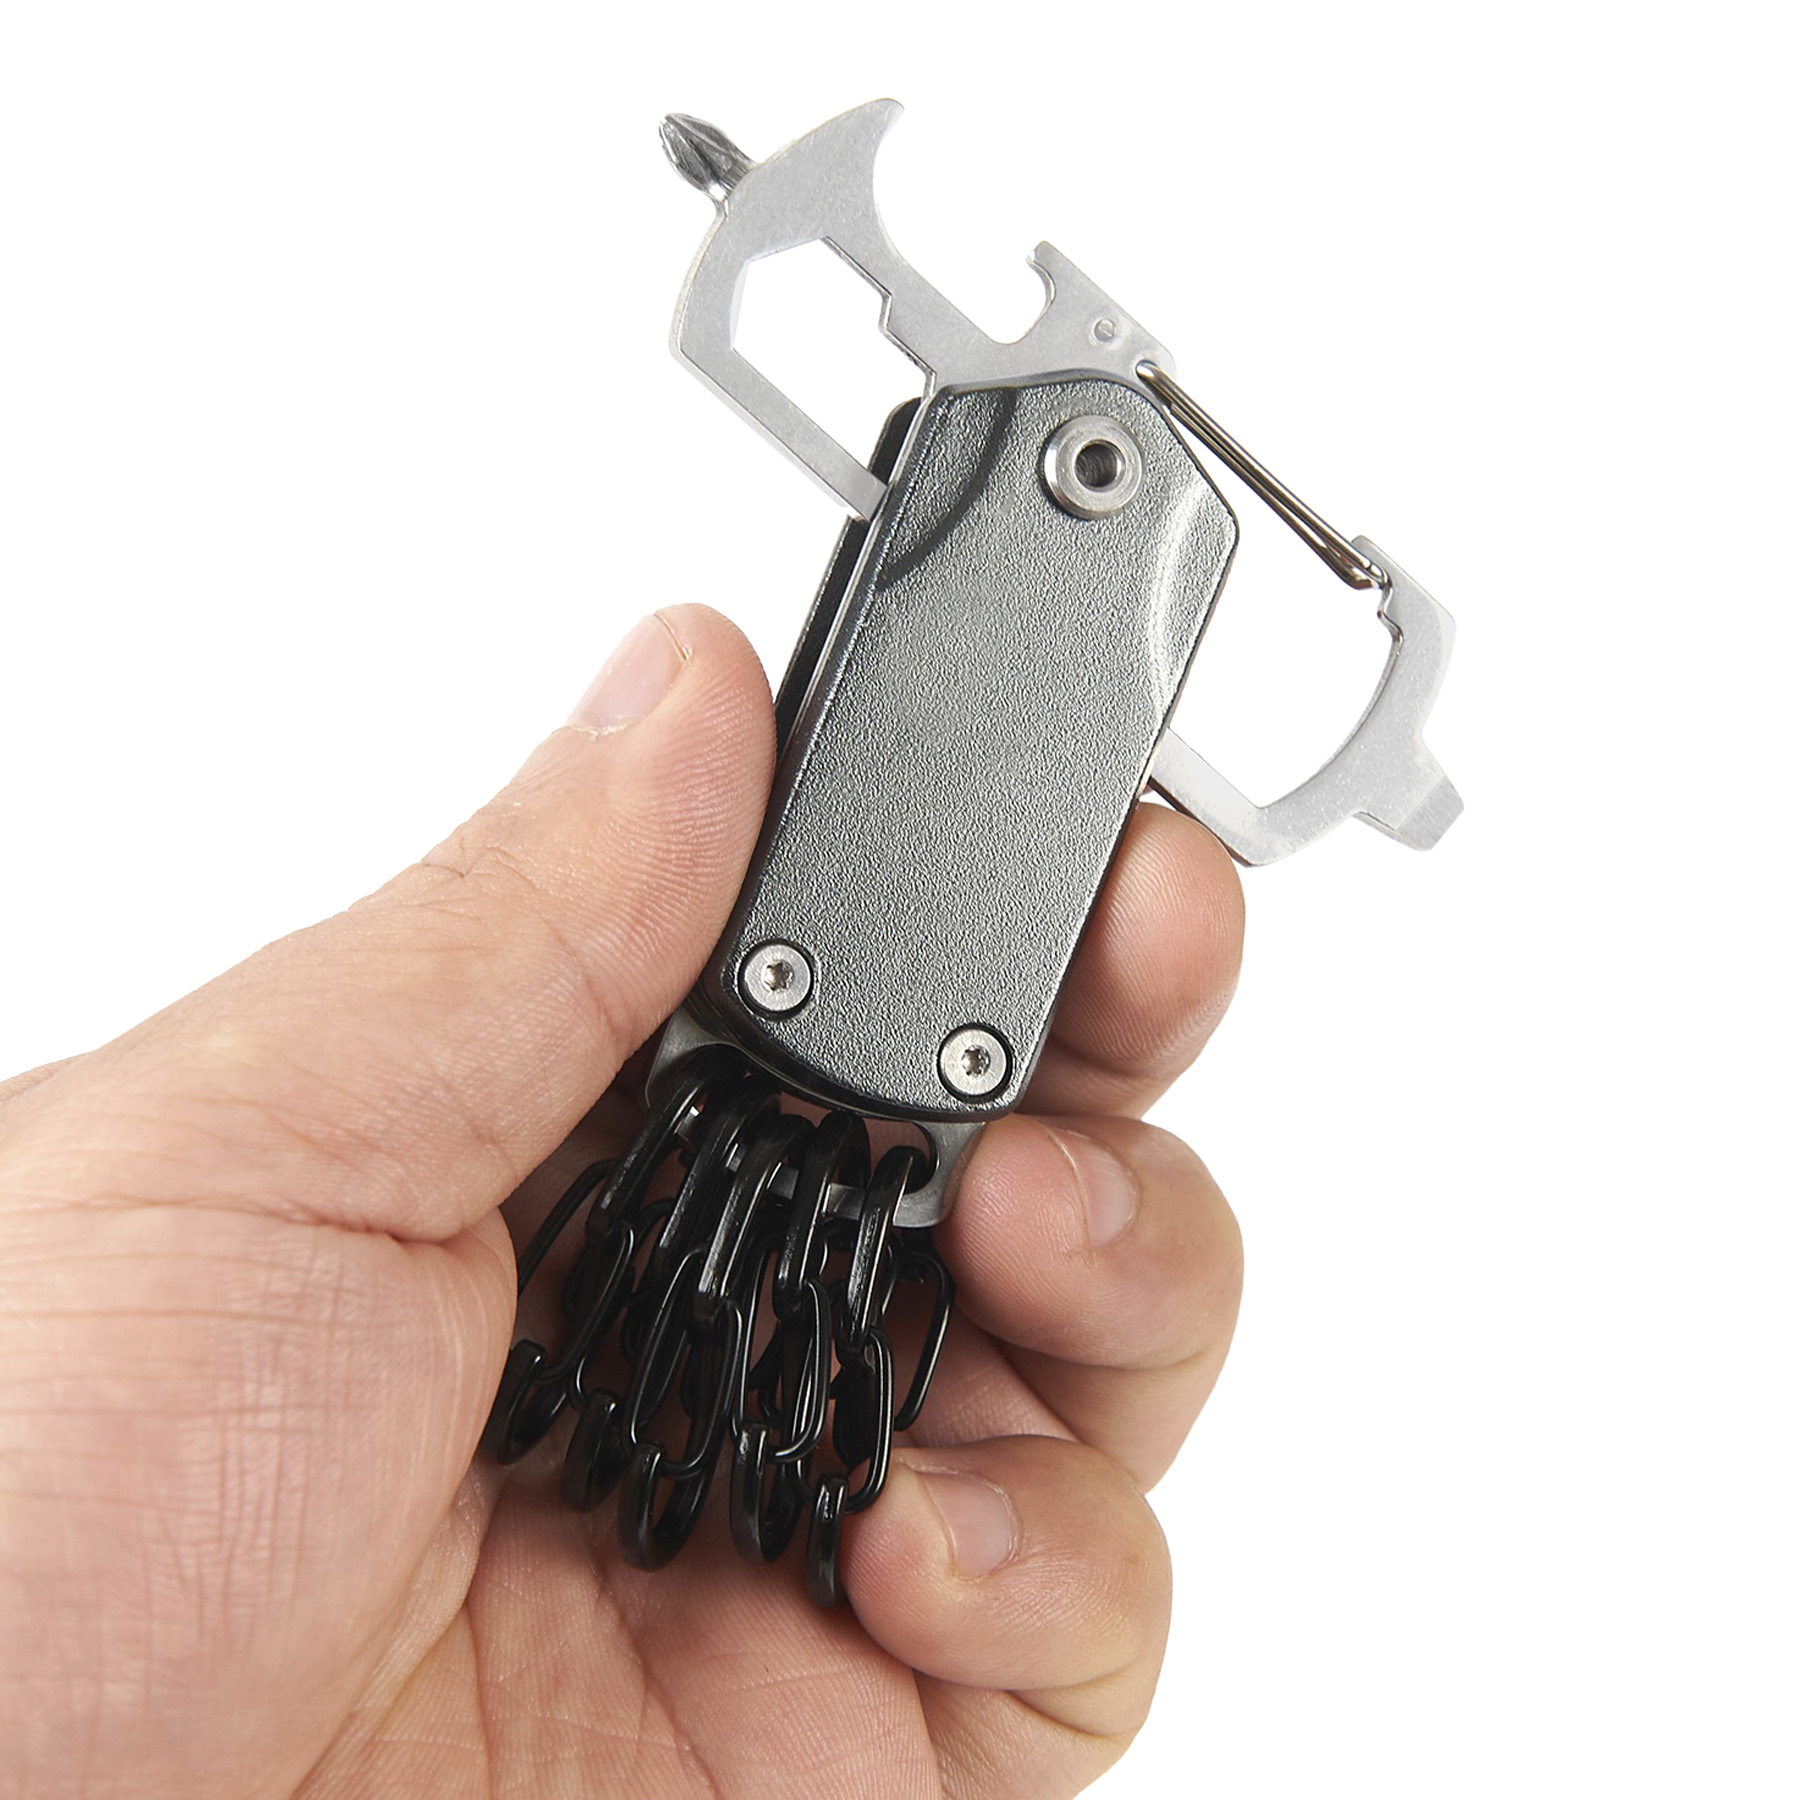 Flip Out Keyring Multifunction tool Portable, DIY projects, camping, hiking. Great for keychain organization; fits on keyring, carabiner, wallet. Features: 3 wrenches, bottle opener, Phillips and flathead screwdrivers and 6 clip on carabiner accessory. Great gift idea for men, glamping, excellent stocking stuffer!